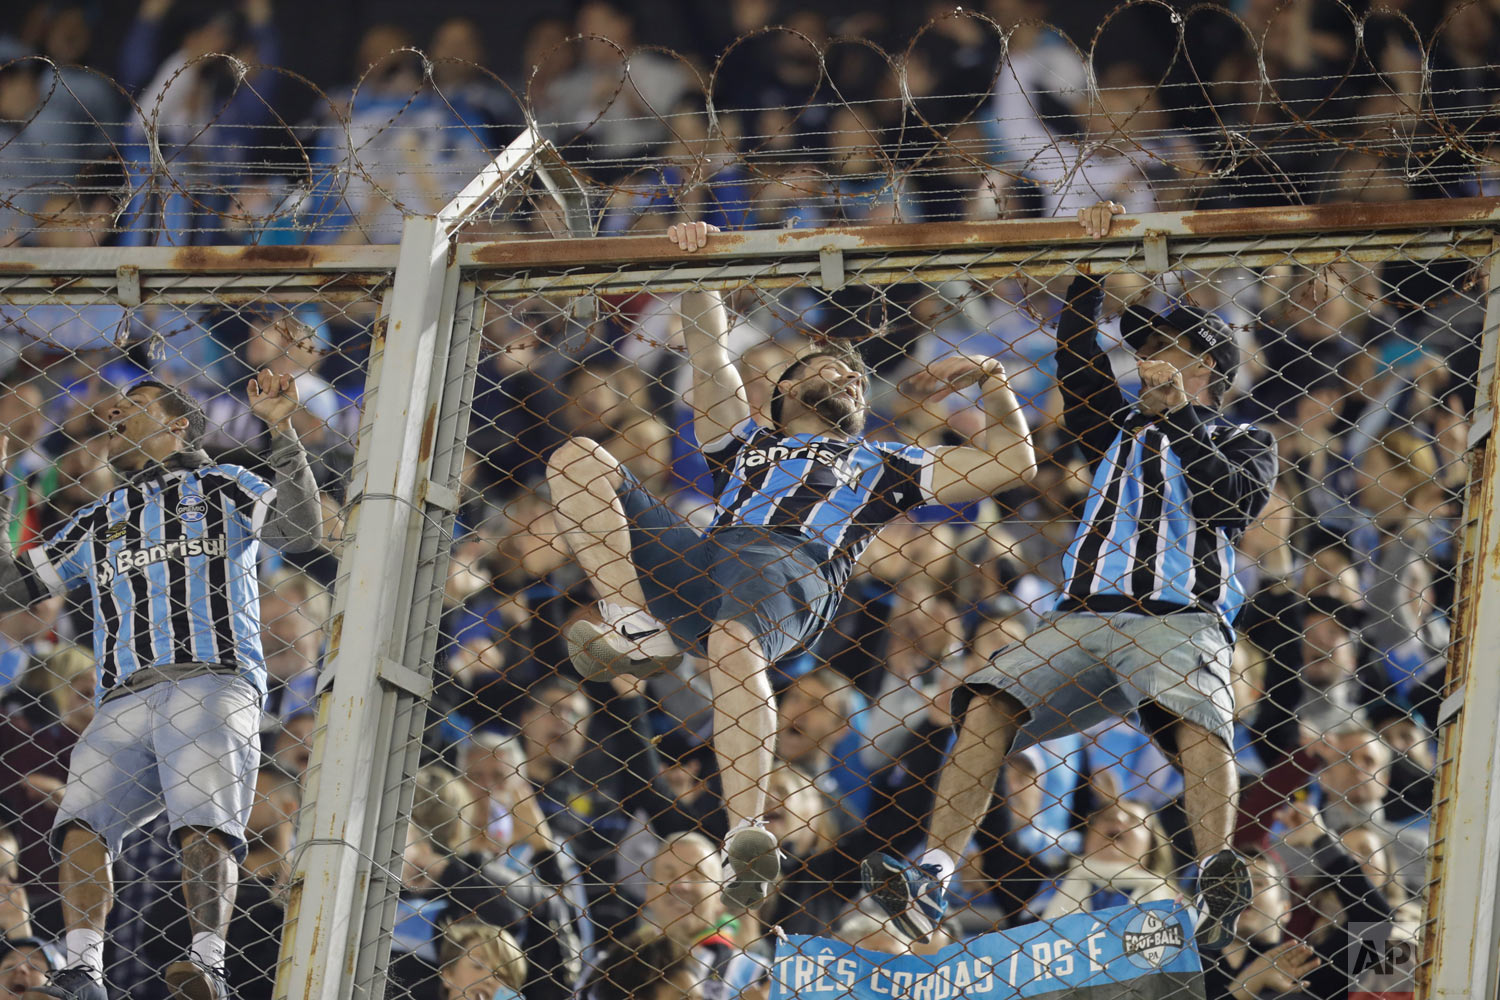  Fans of Brazil's Gremio celebrate on the fence after Michel's goal against Argentina's River Plate during a Copa Libertadores semifinal first leg soccer match in Buenos Aires, Argentina, Oct. 23, 2018. Gremio won 1-0. (AP Photo/Natacha Pisarenko) 